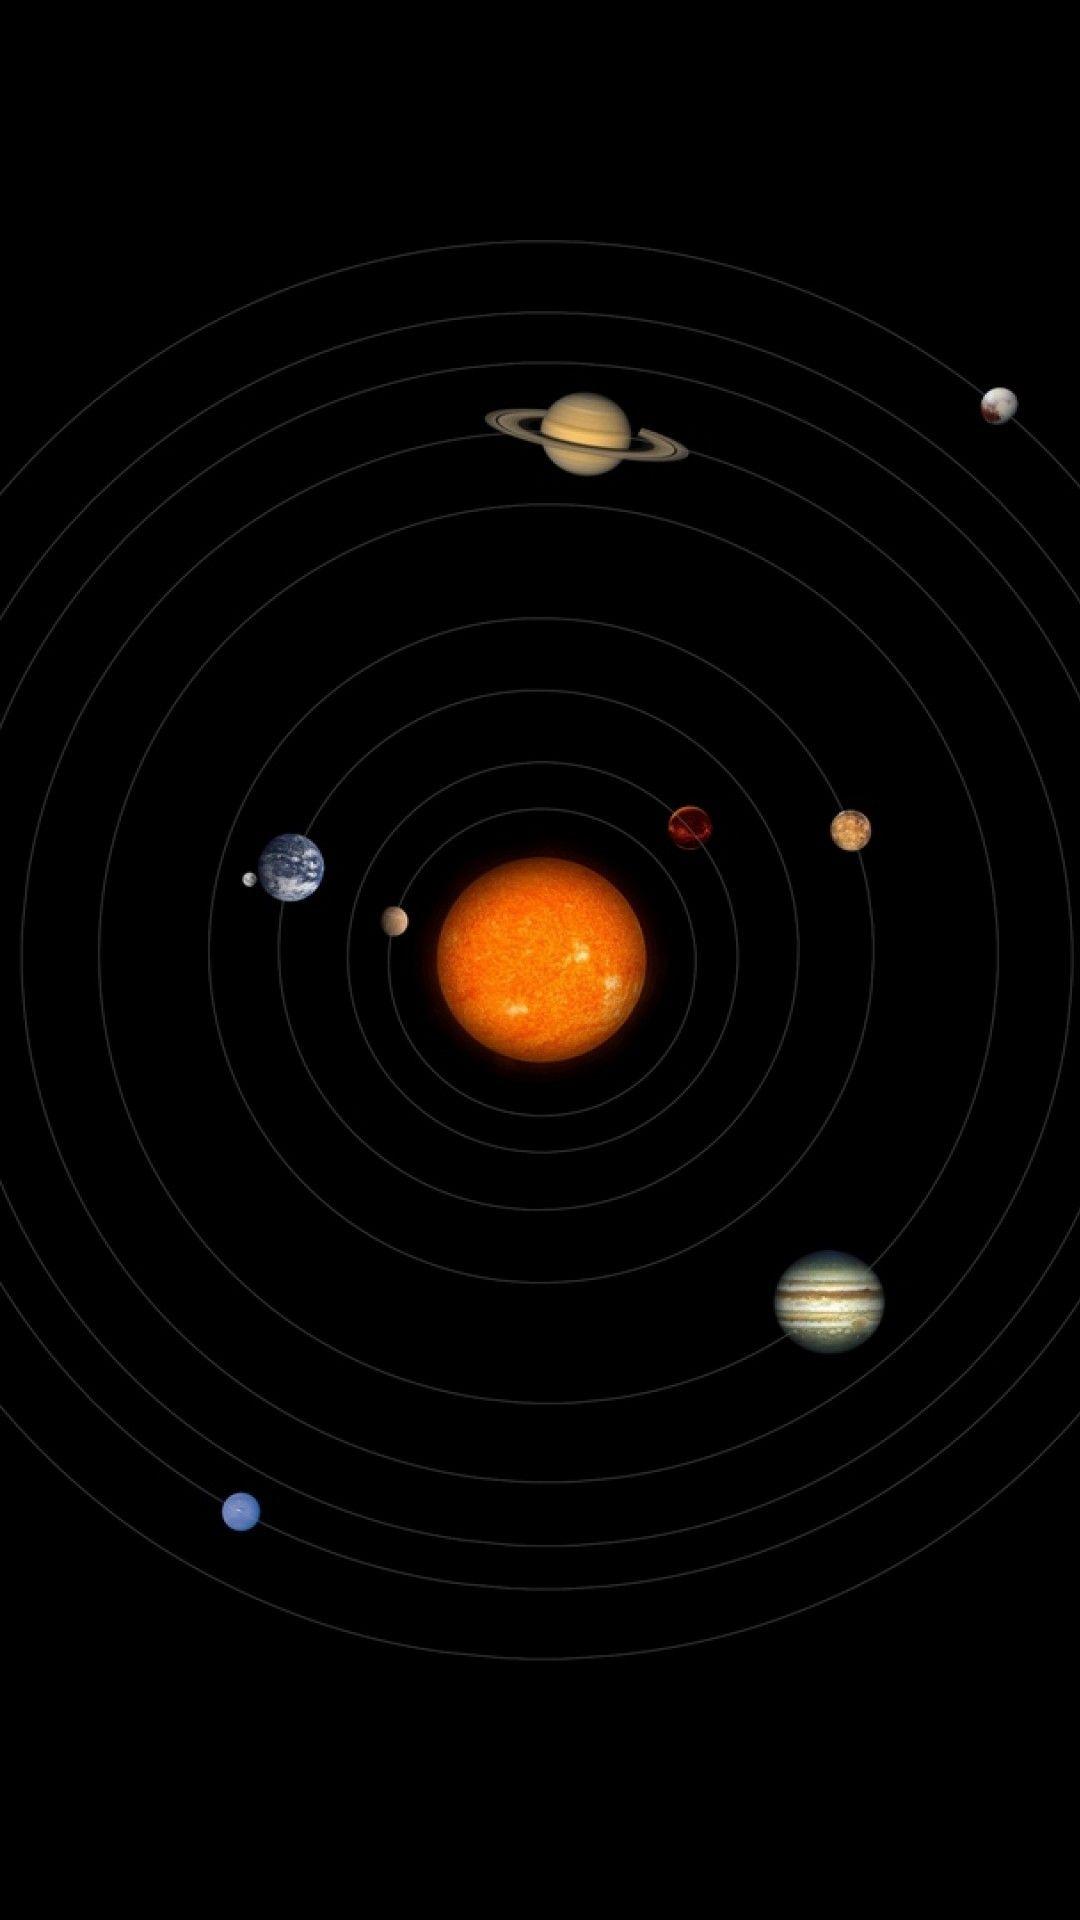 Solar System iPhone Wallpapers - Top Free Solar System iPhone